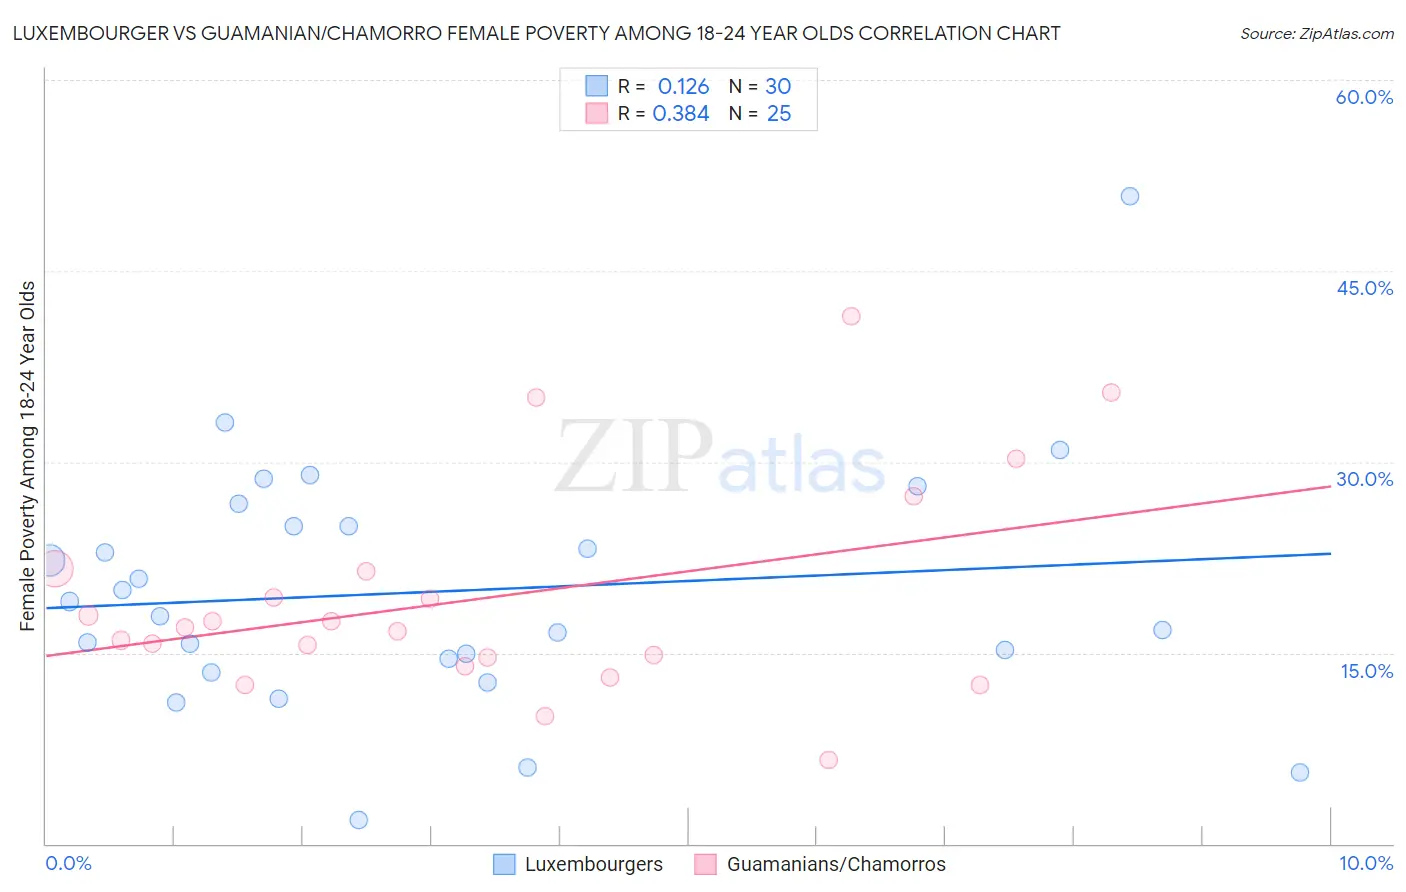 Luxembourger vs Guamanian/Chamorro Female Poverty Among 18-24 Year Olds